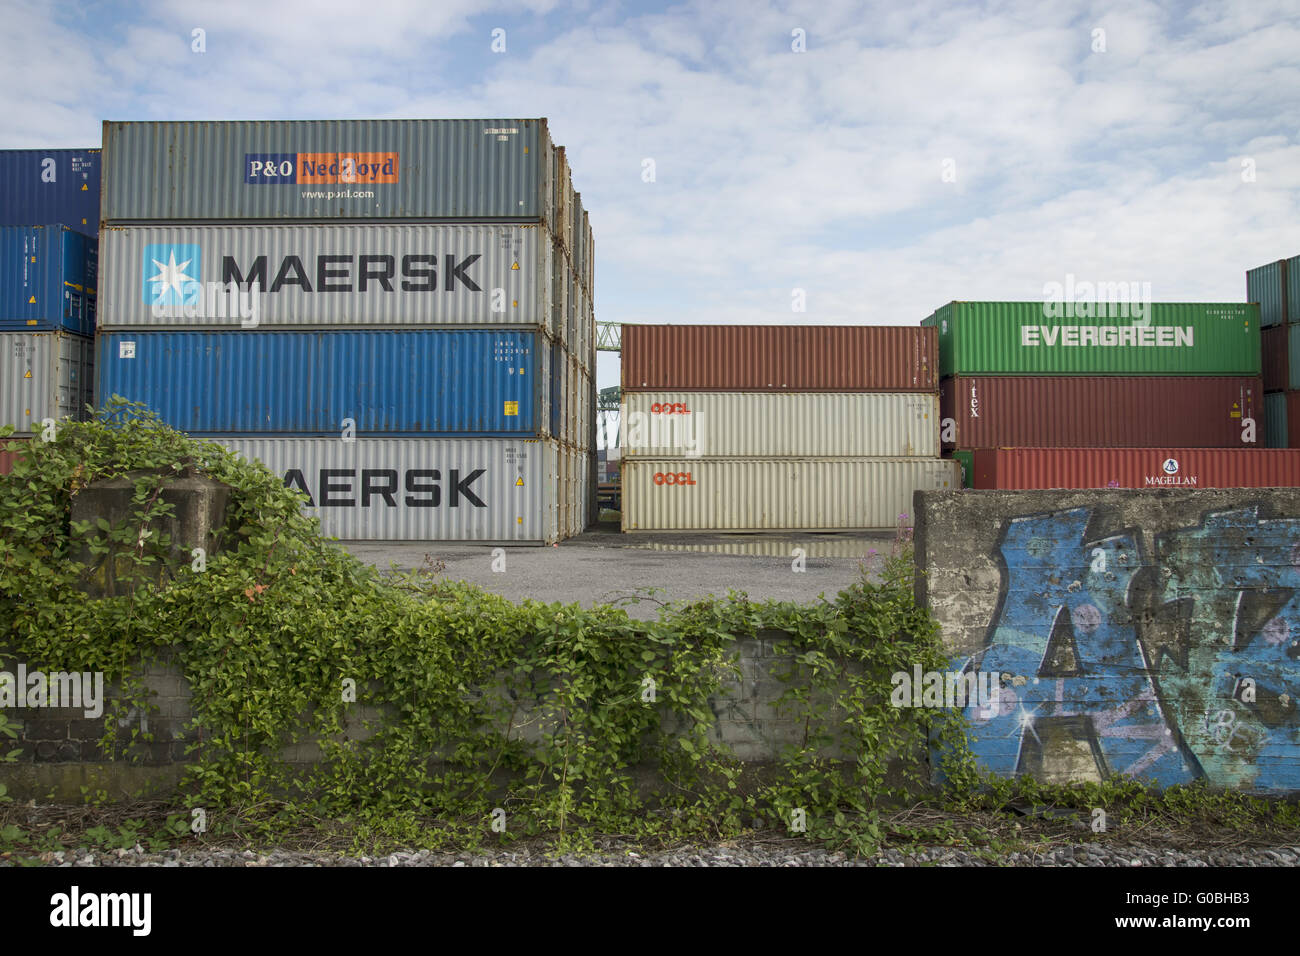 In the container harbour of Dortmund, Germany Stock Photo